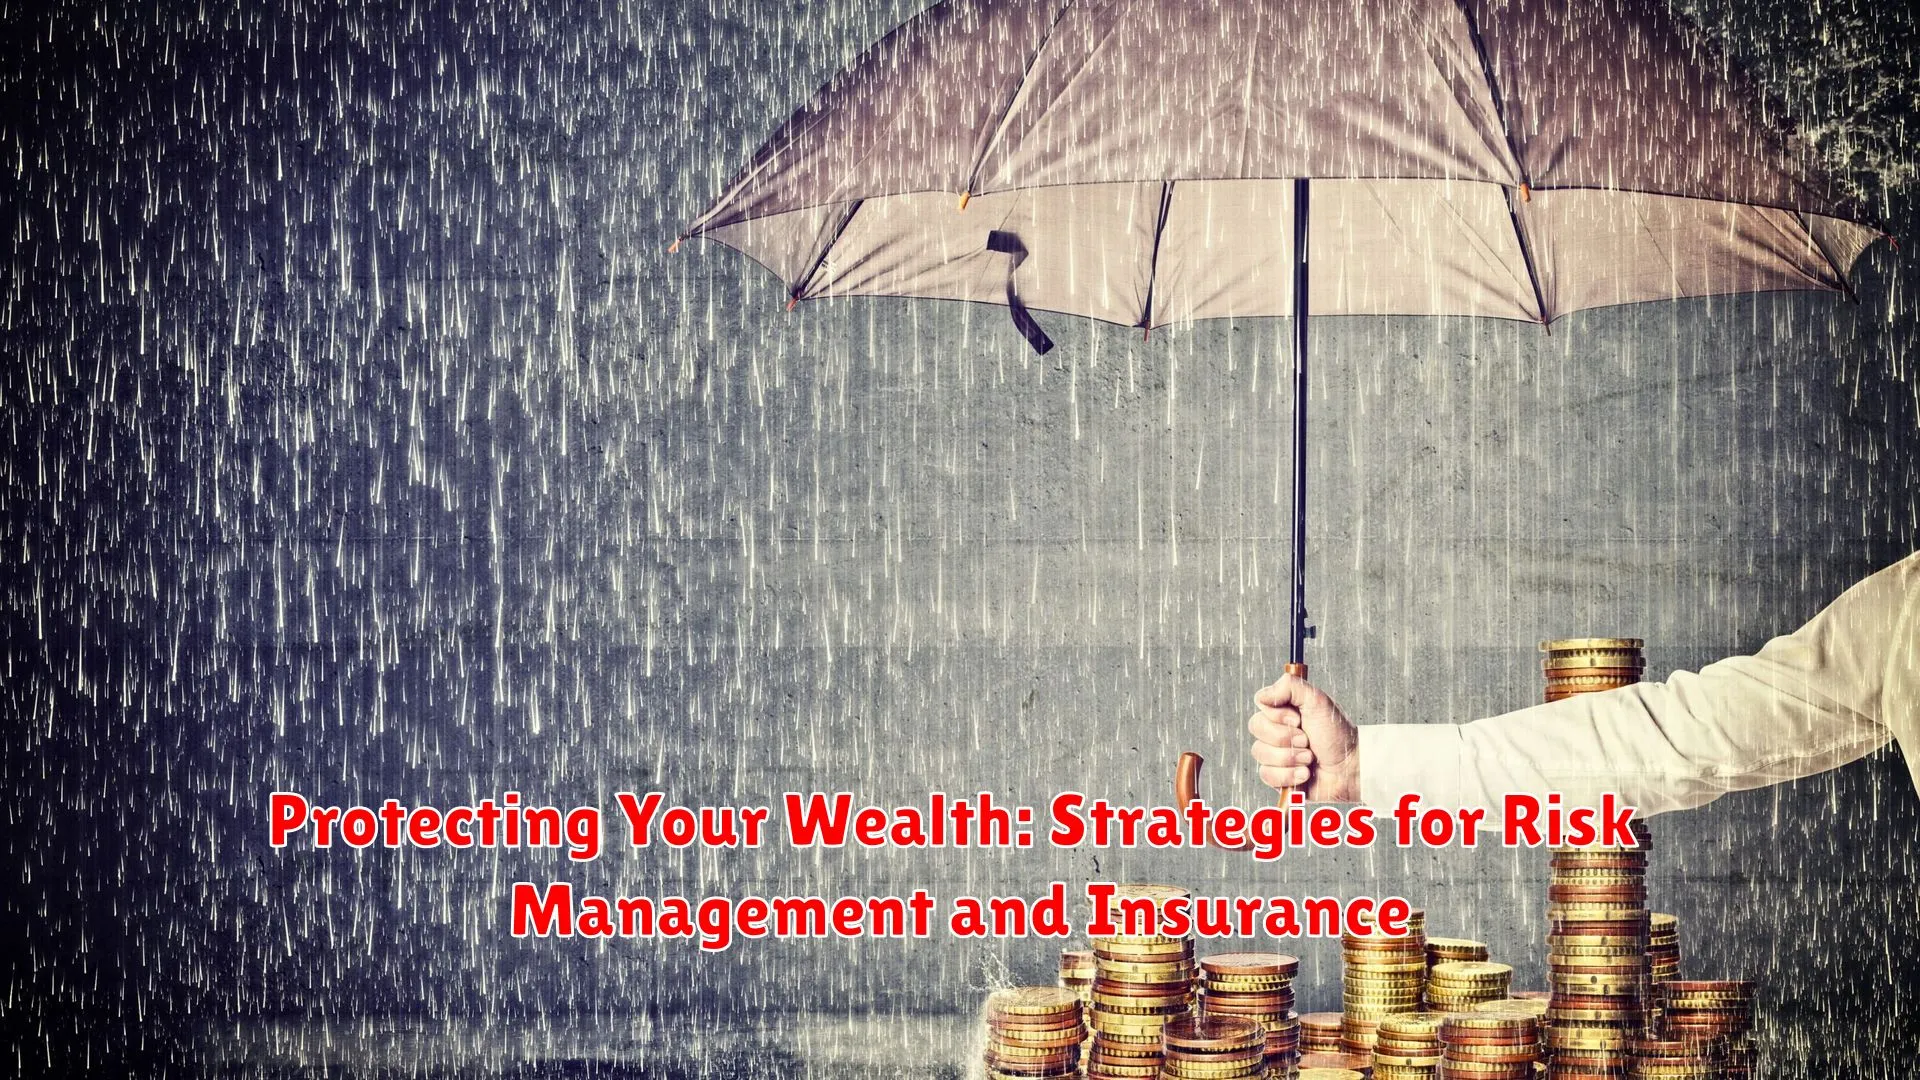 Protecting Your Wealth: Strategies for Risk Management and Insurance